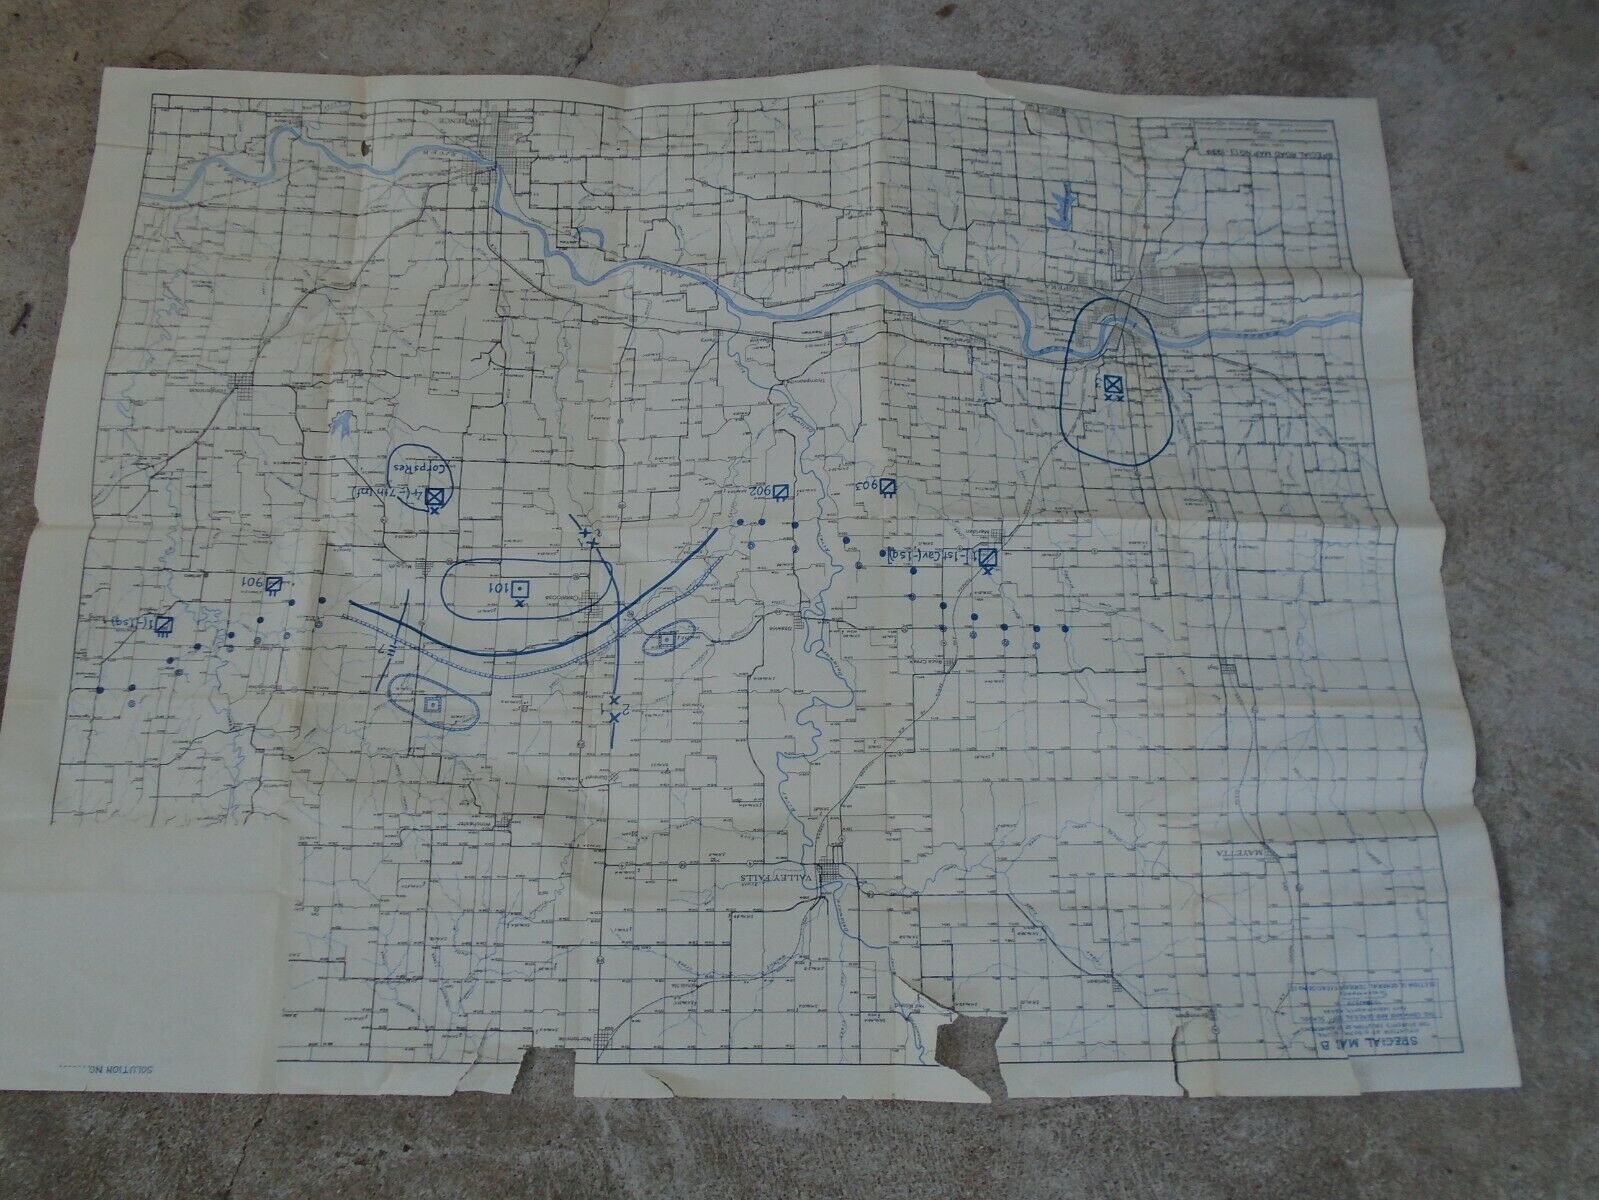 Ft Leavenworth, Command And General Staff School 1939 Exercise Map, Topeka